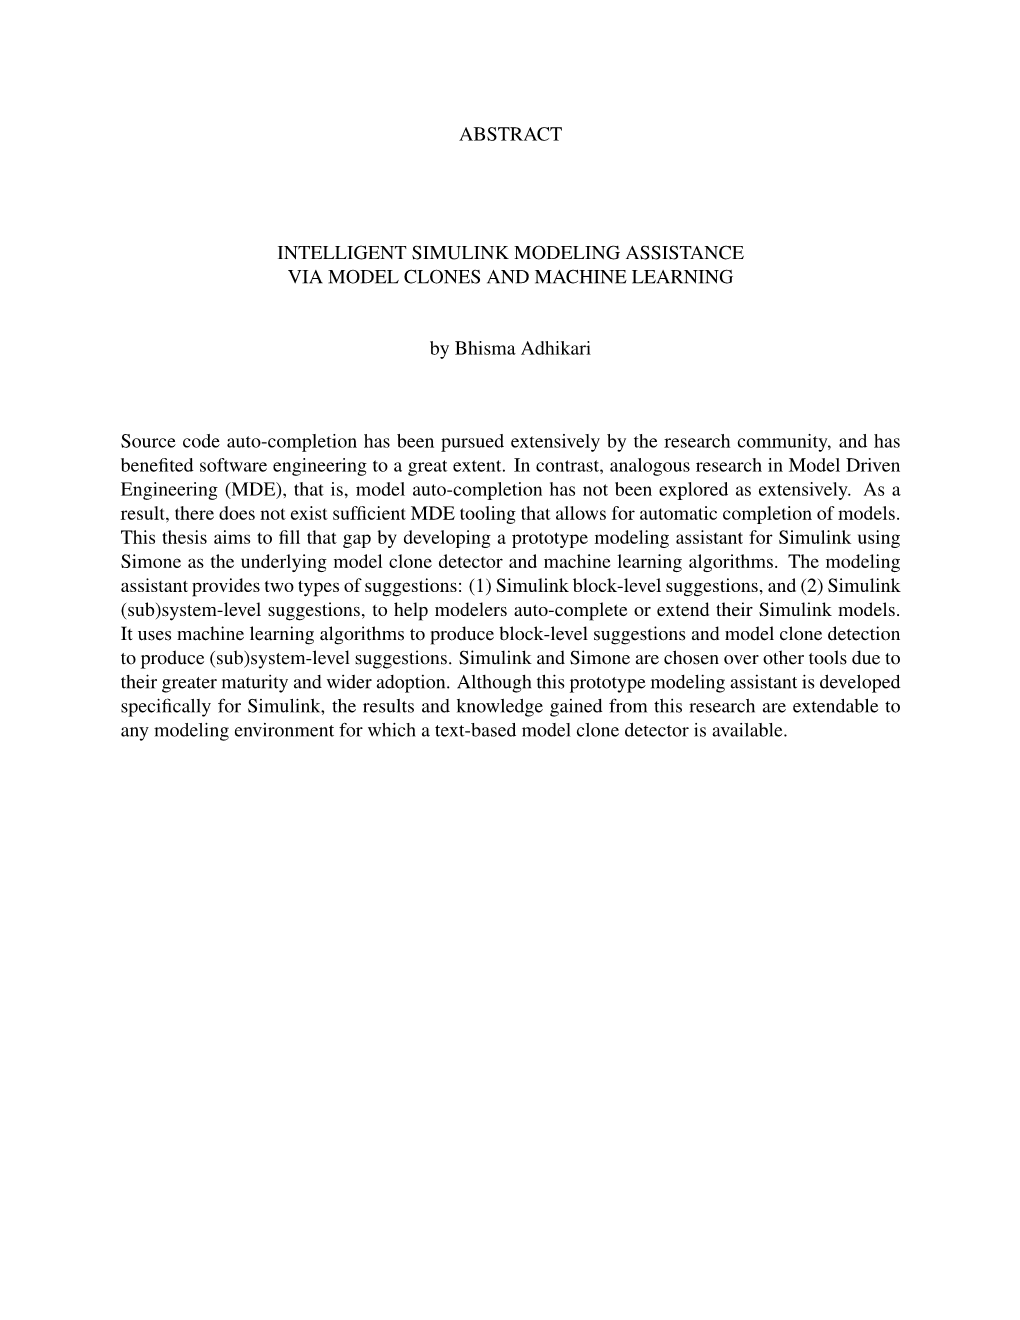 ABSTRACT INTELLIGENT SIMULINK MODELING ASSISTANCE VIA MODEL CLONES and MACHINE LEARNING by Bhisma Adhikari Source Code Auto-Comp